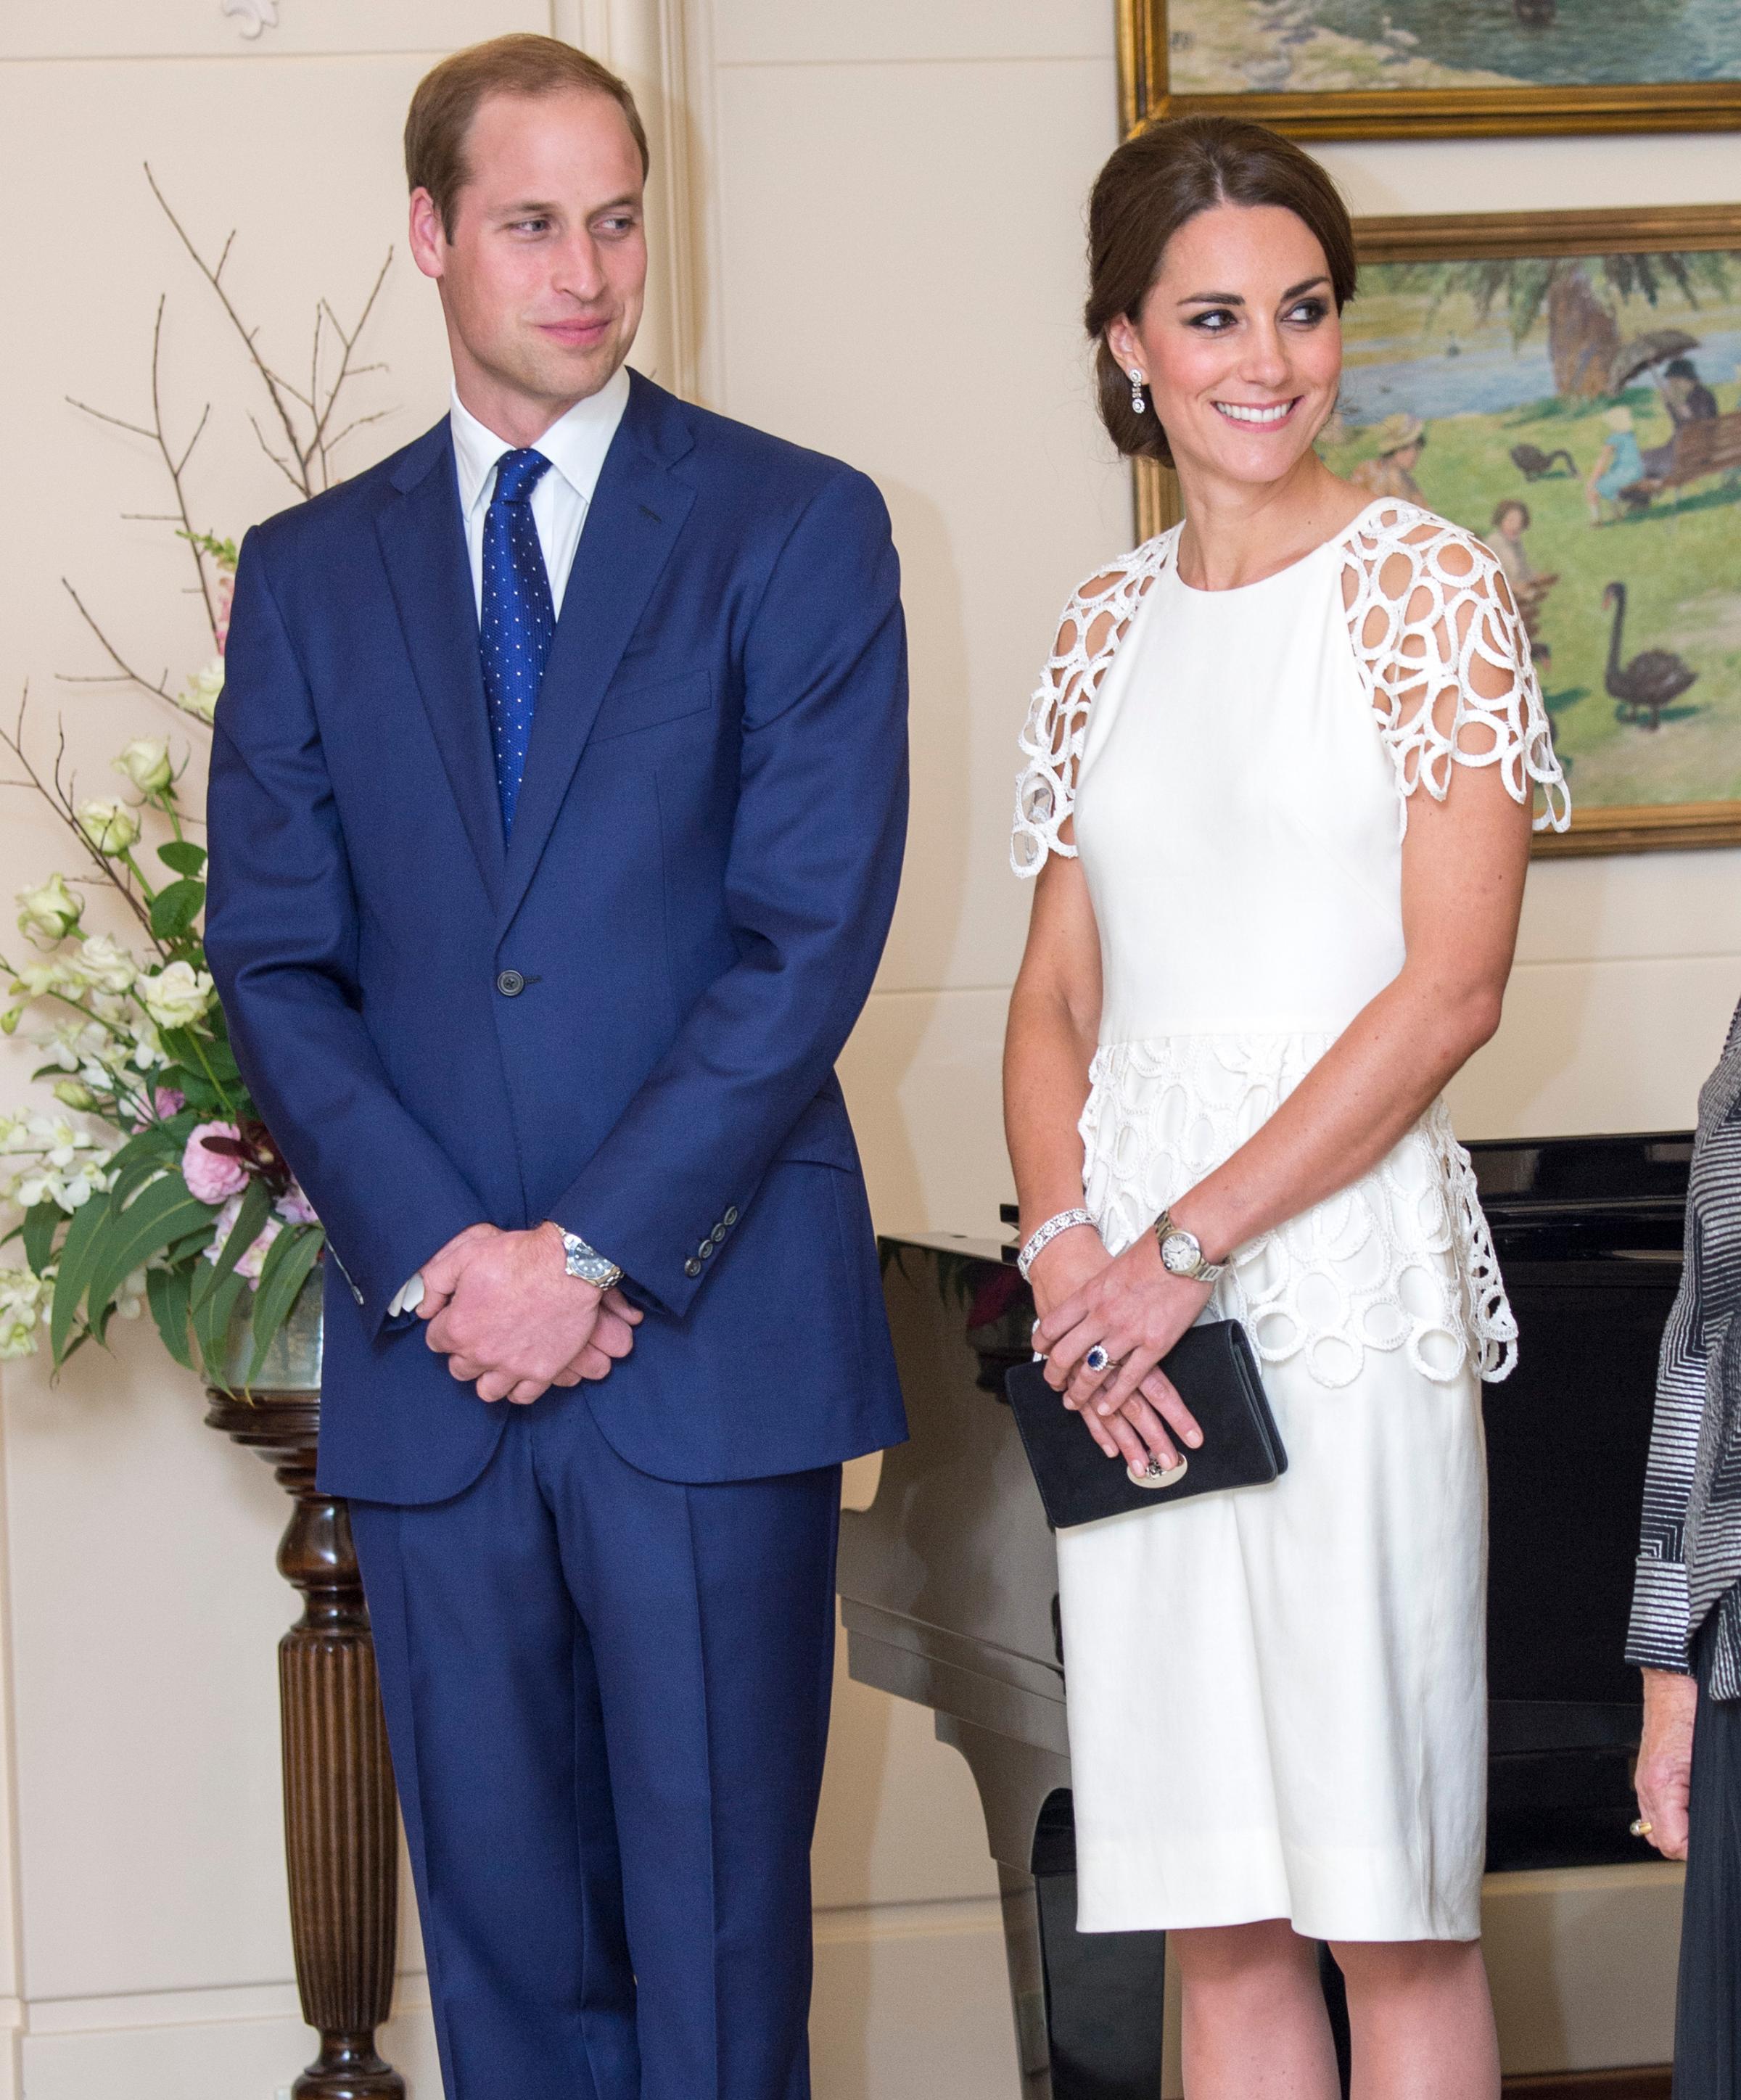 From left: The Duke and Duchess of Cambridge during a reception at Government House in Canberra on April 24, 2014.